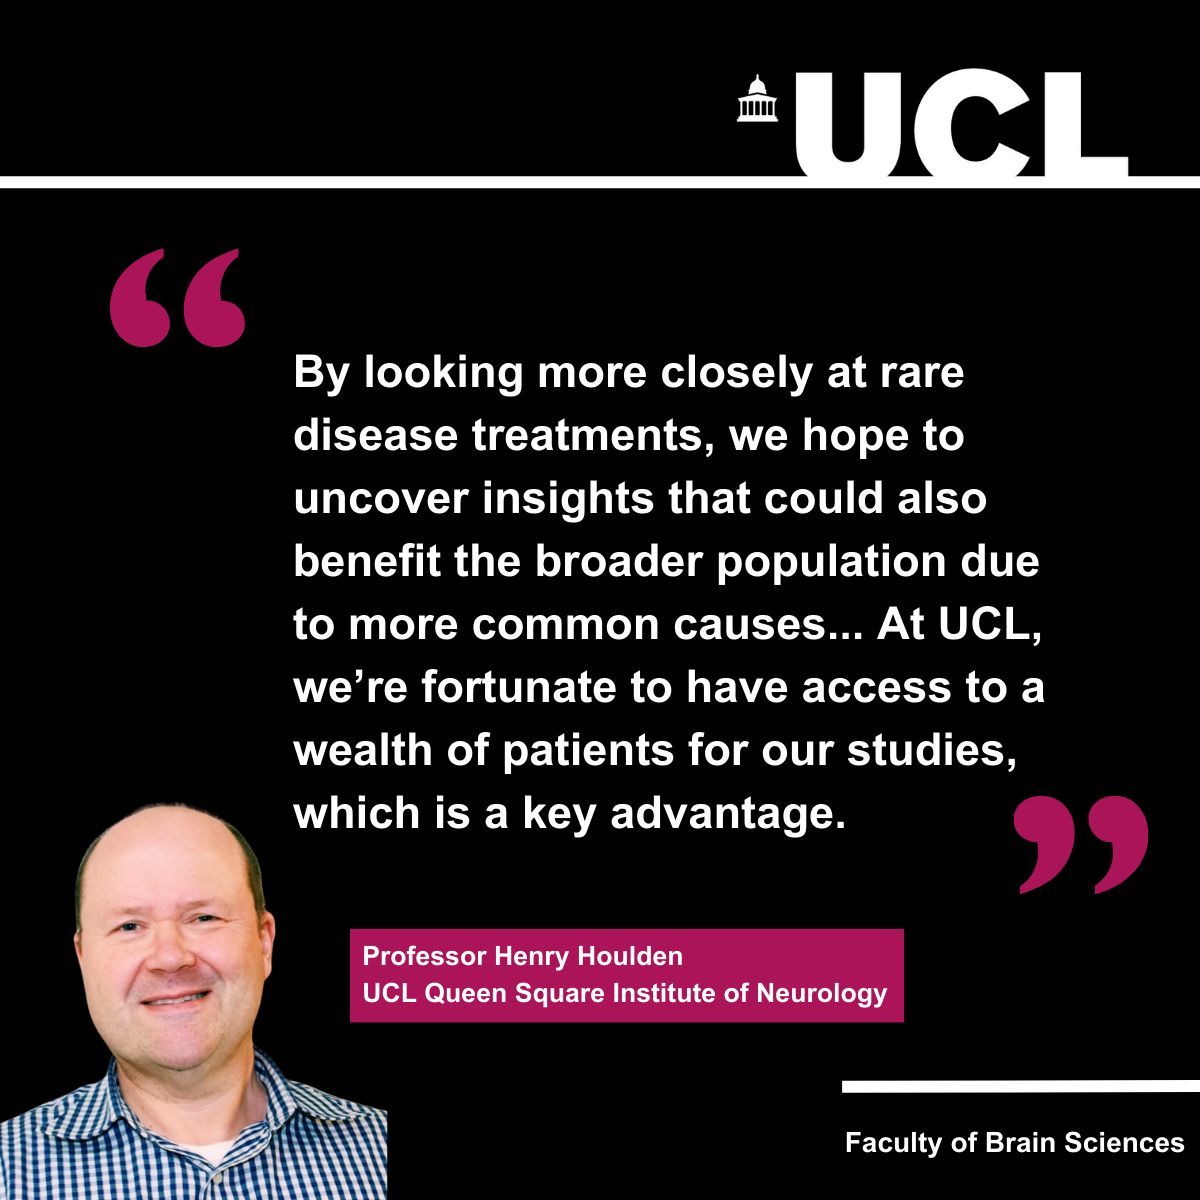 Prof Henry Houlden leads the @IonSynapse lab at @UCLIoN and plays a key role on the @GenomicsEngland board for rare diseases as part of the 100,000 Genomes Project. He explains what attracted him to research rare diseases ➡️ bit.ly/4bT6CJM #RareDiseaseDay